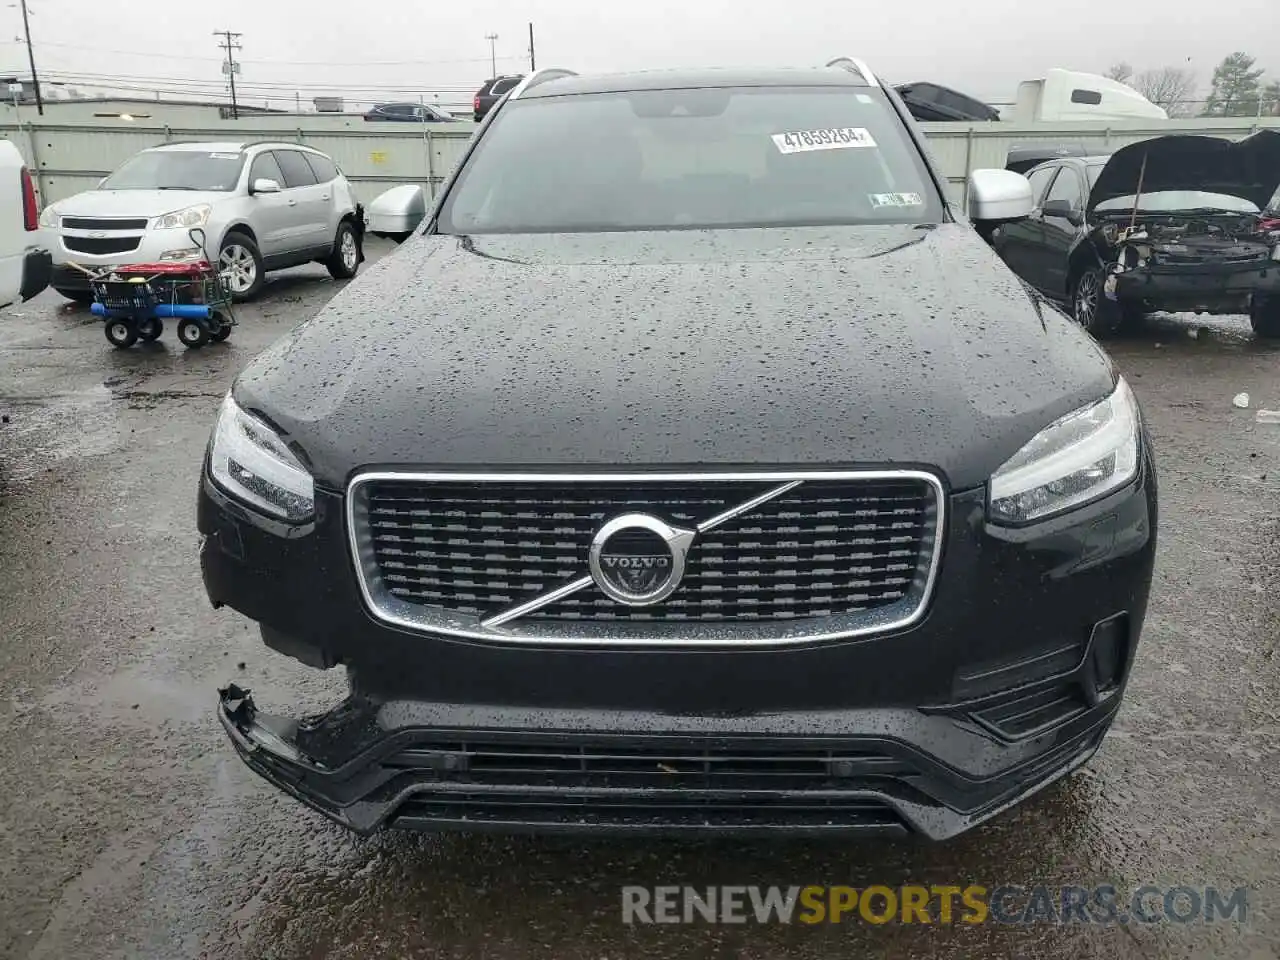 5 Photograph of a damaged car YV4102PM6K1479186 VOLVO XC90 2019